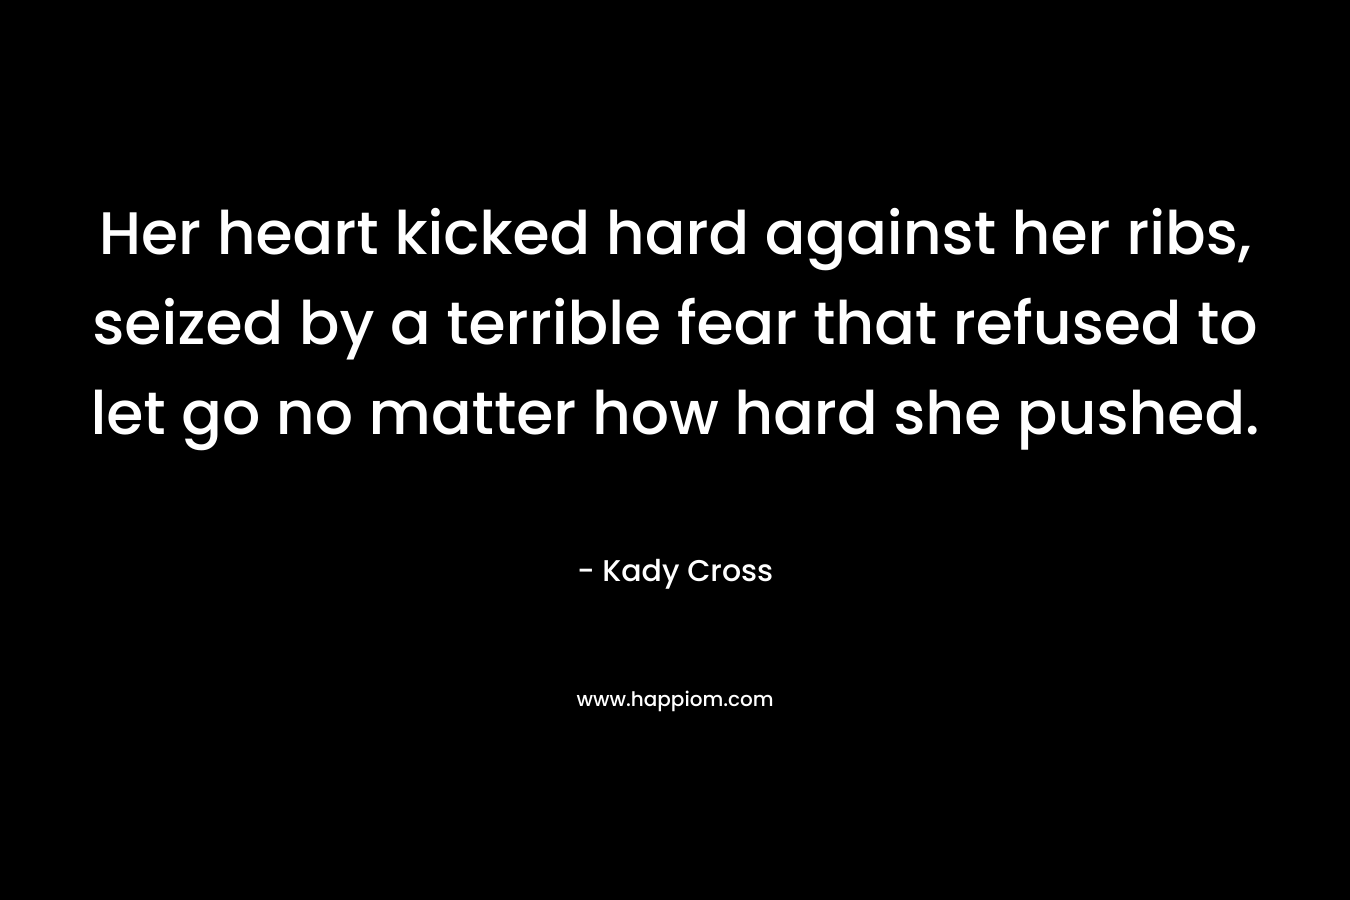 Her heart kicked hard against her ribs, seized by a terrible fear that refused to let go no matter how hard she pushed. – Kady Cross